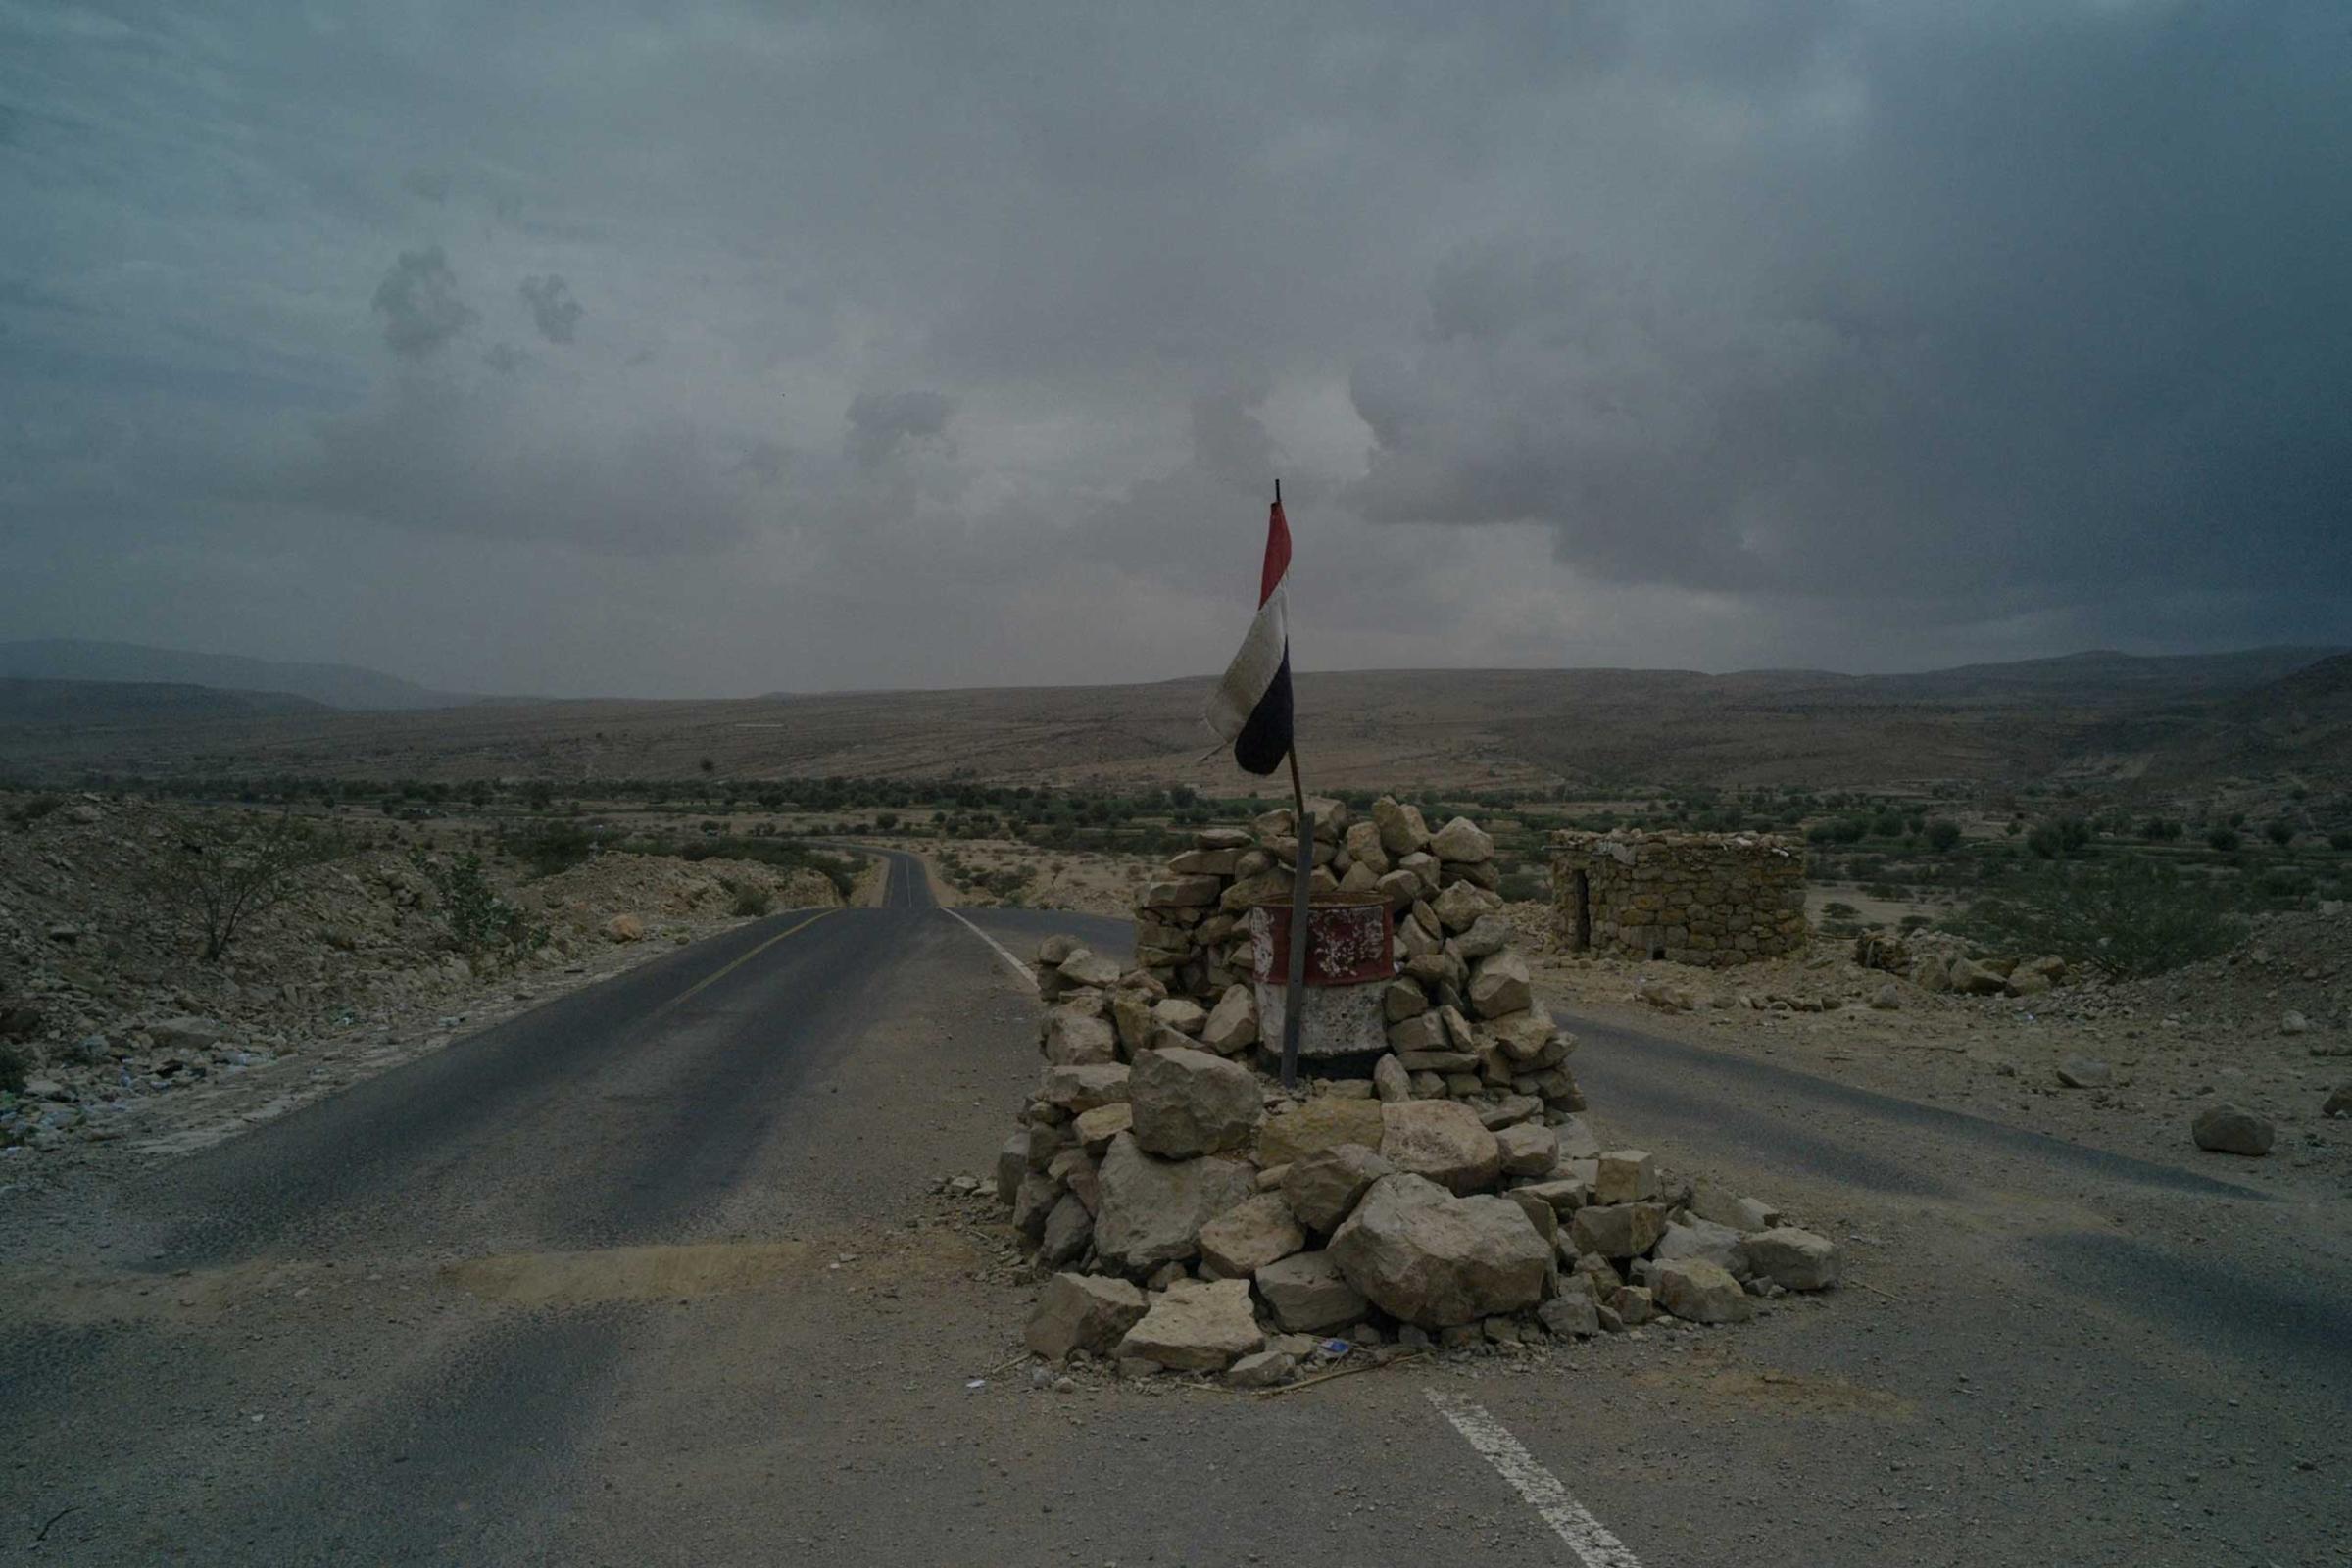 Destroyed check-point at the entrance of Sa’dah province.